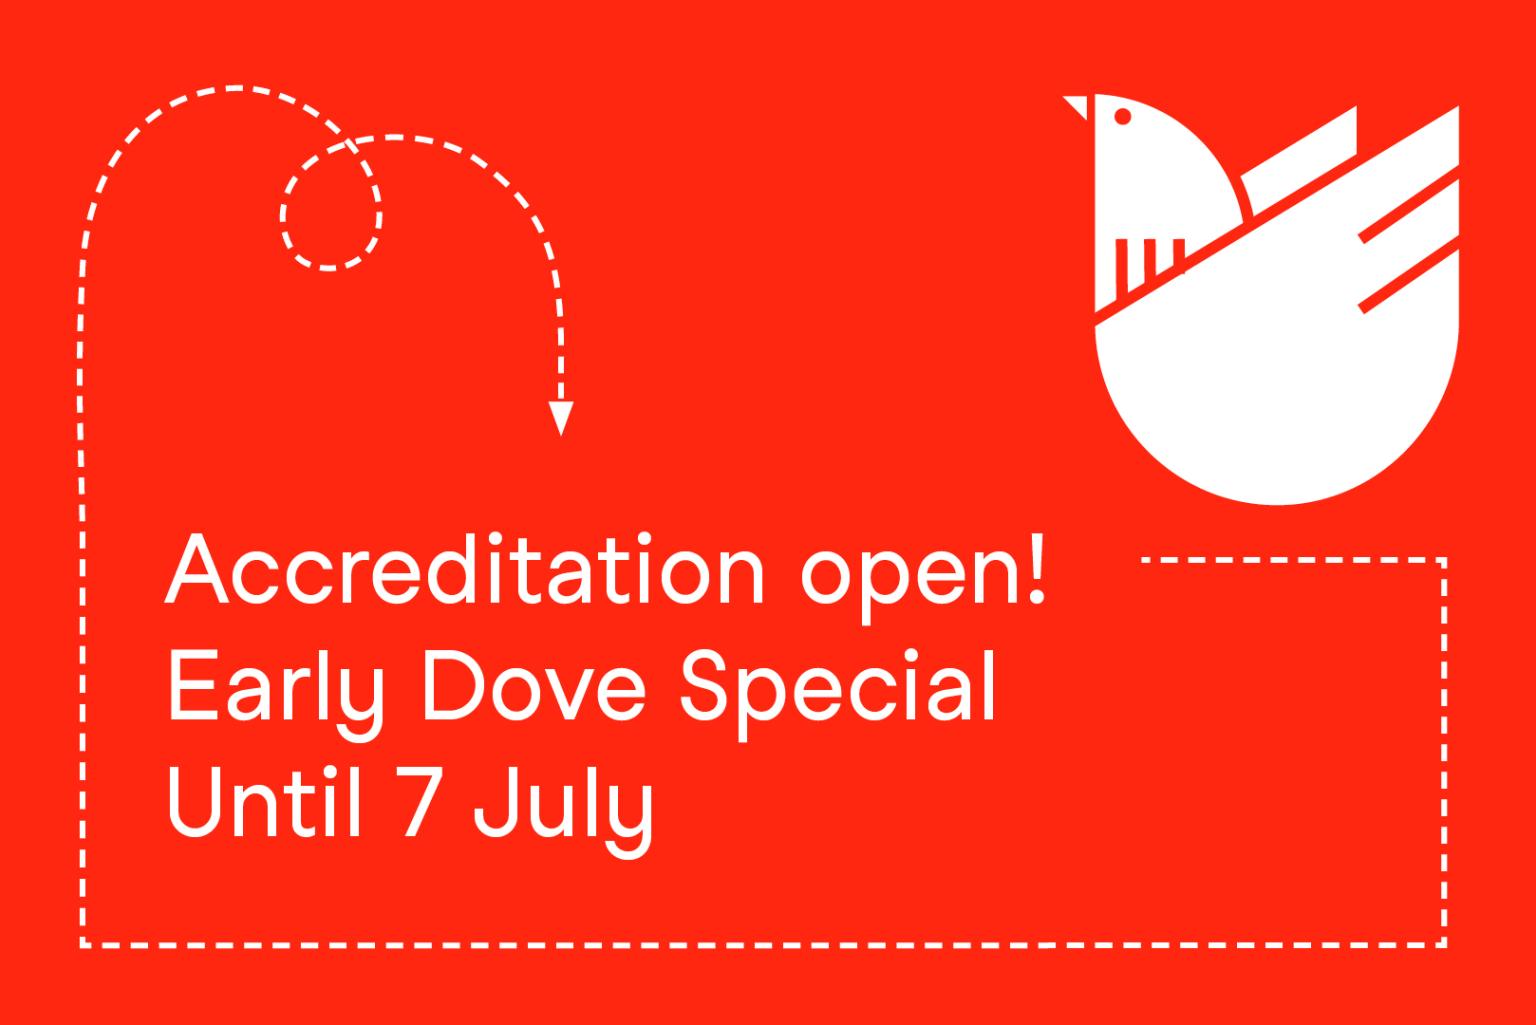 Text graphic: Illustration of a white dove. Left to it the text: "Accreditation open".